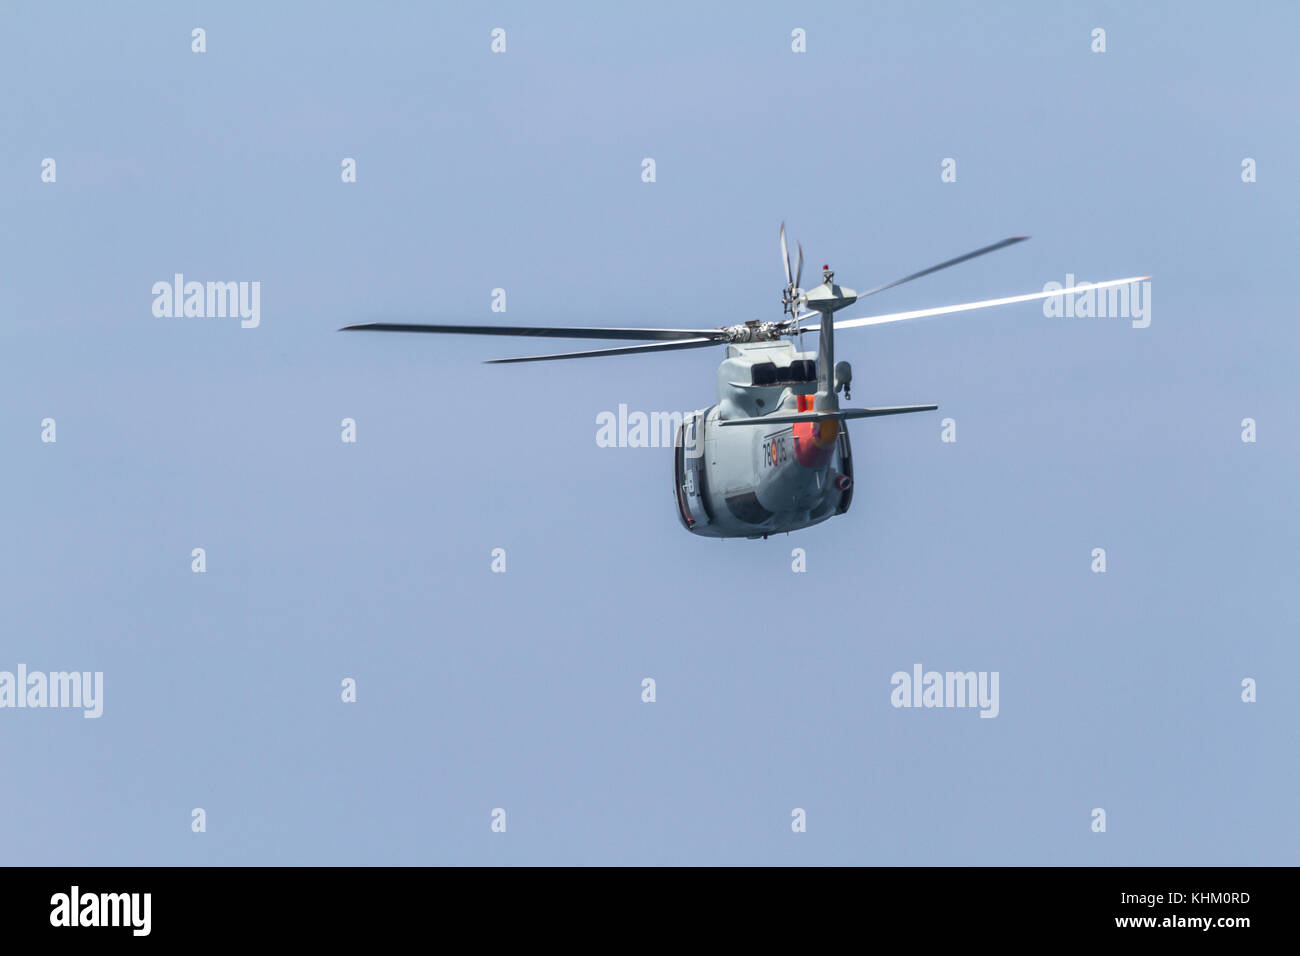 MOTRIL, GRANADA, SPAIN-JUN 11: Helicopter Sikorsky S-76C taking part in an exhibition on the 12th international airshow of Motril on Jun 11, 2017, in  Stock Photo